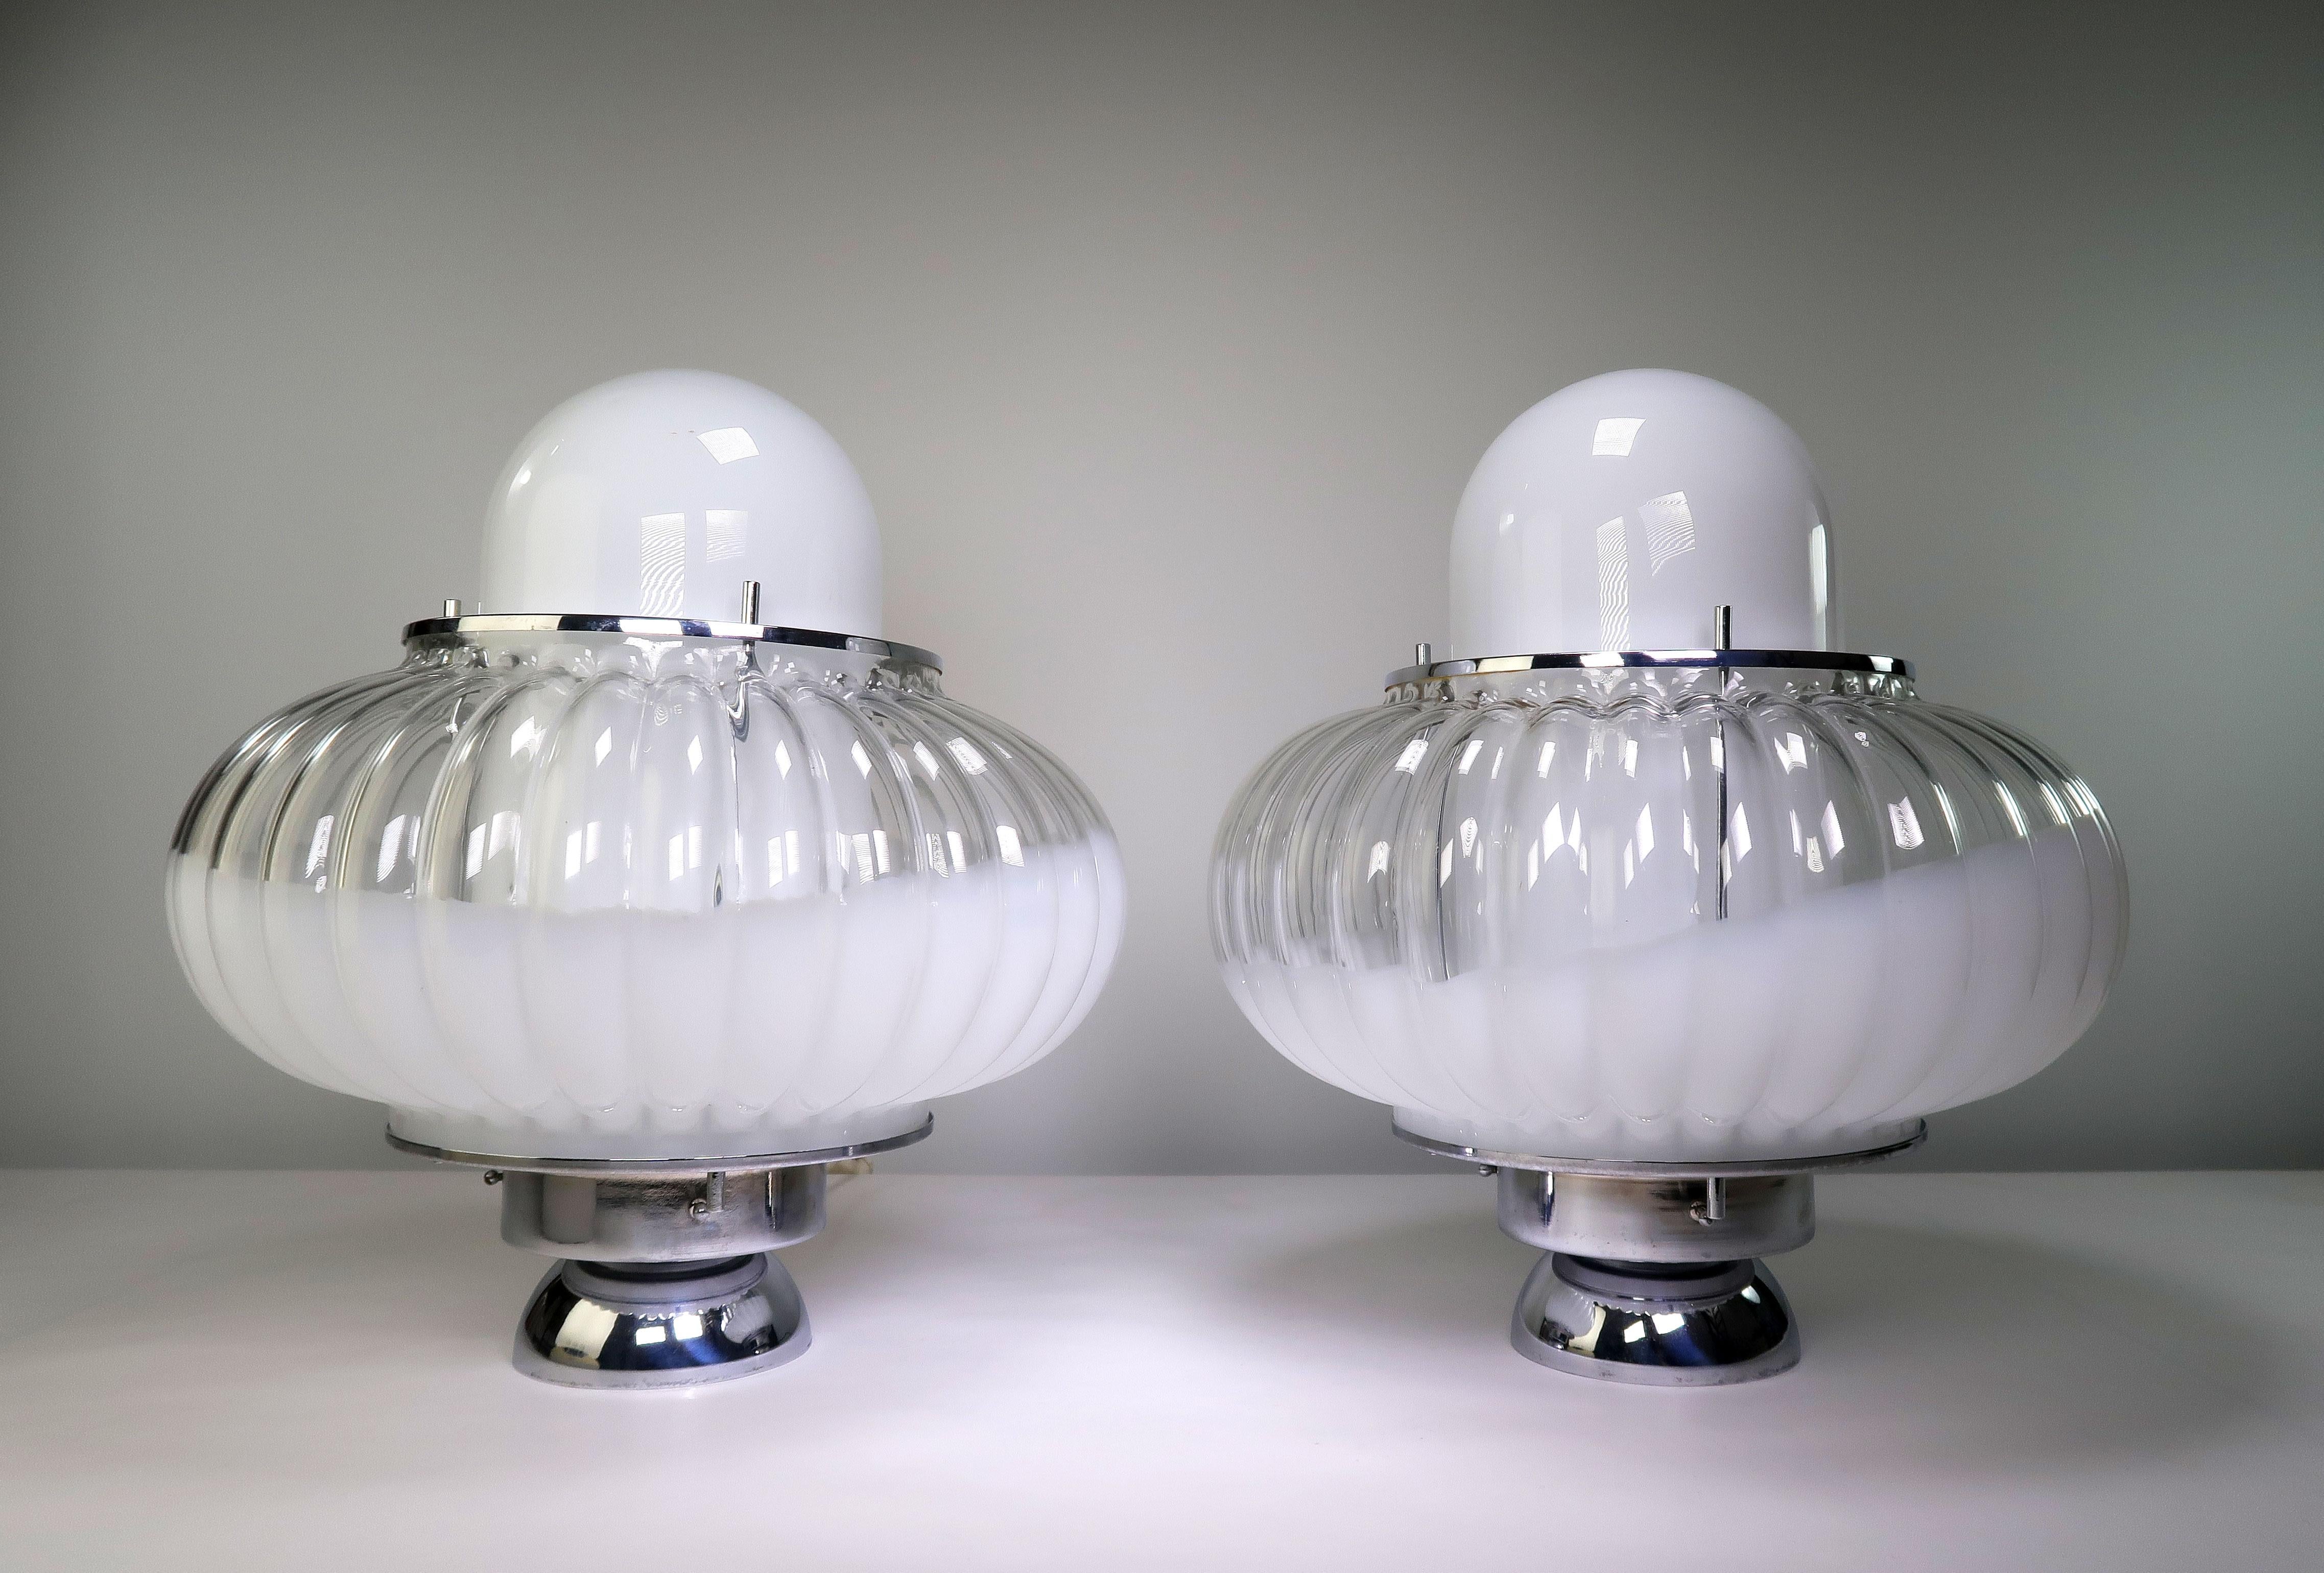 Set of large iconic Italian modernist atomic age Mazzega Murano statement table lamps by glass artist Carlo Nason. Two glass shades nesting within each other to create a spectacular and sculptural UFO like form with chrome hardware and base. Smooth